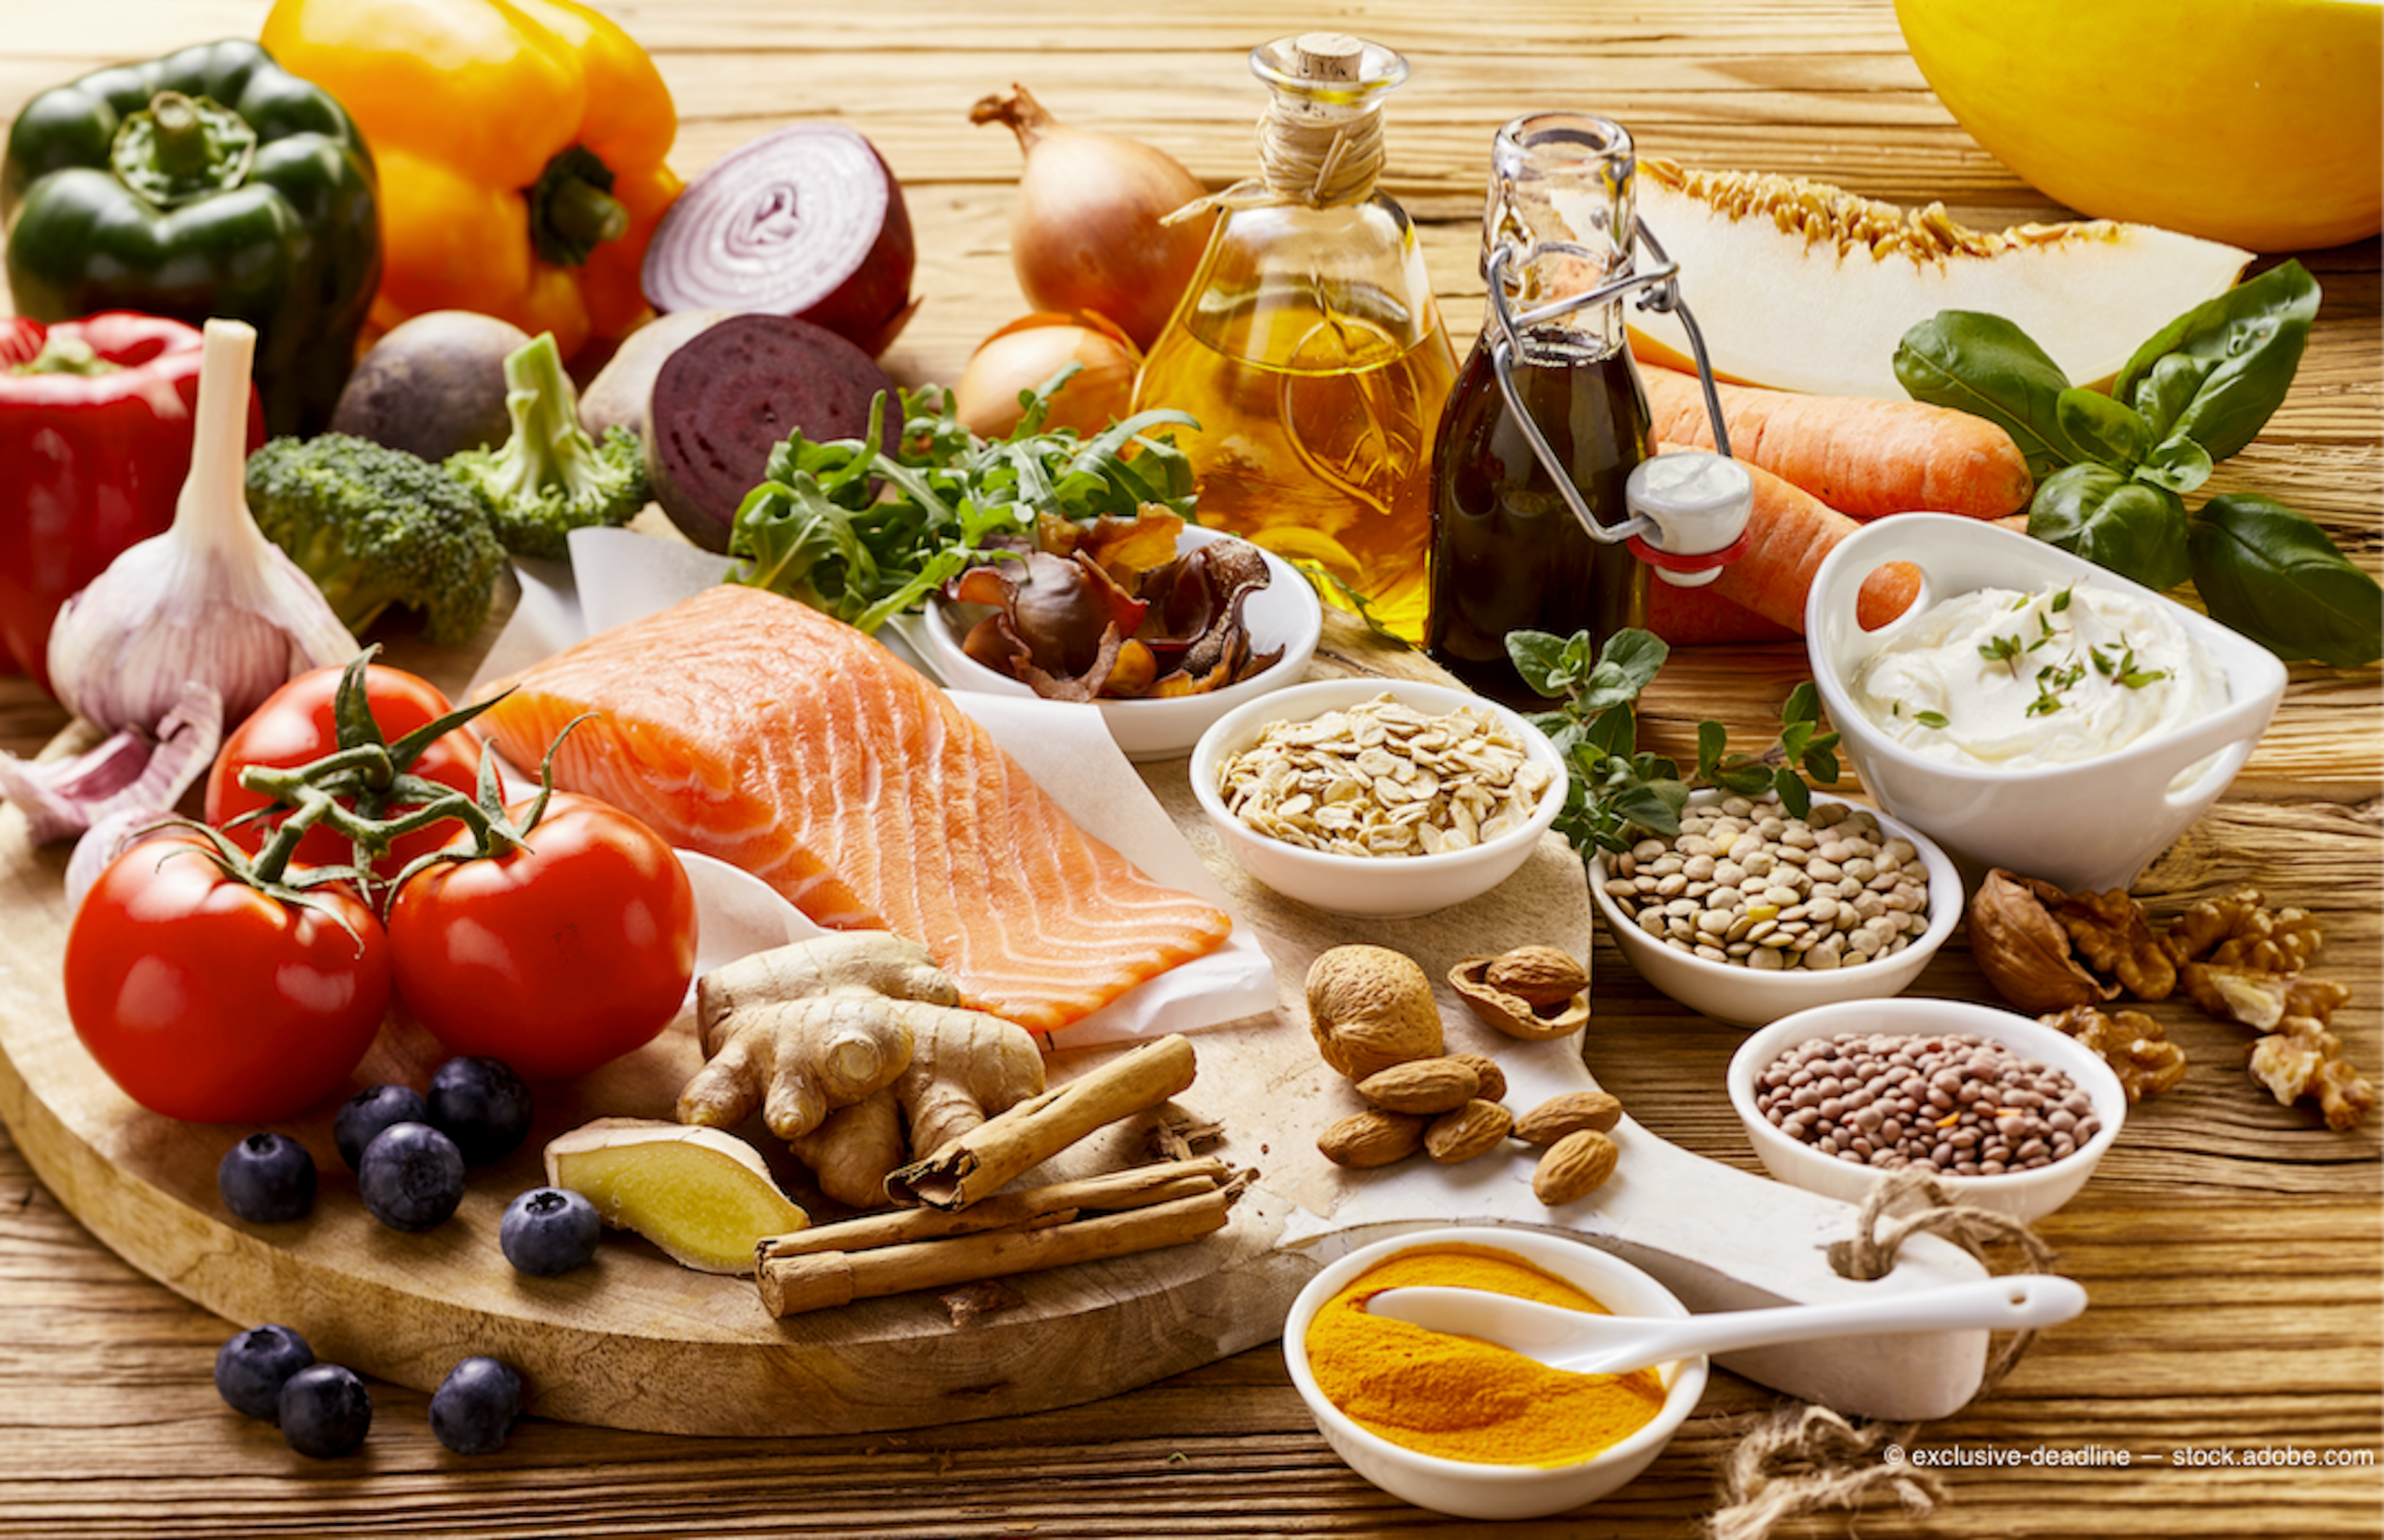 Diet change may affect glaucoma risk